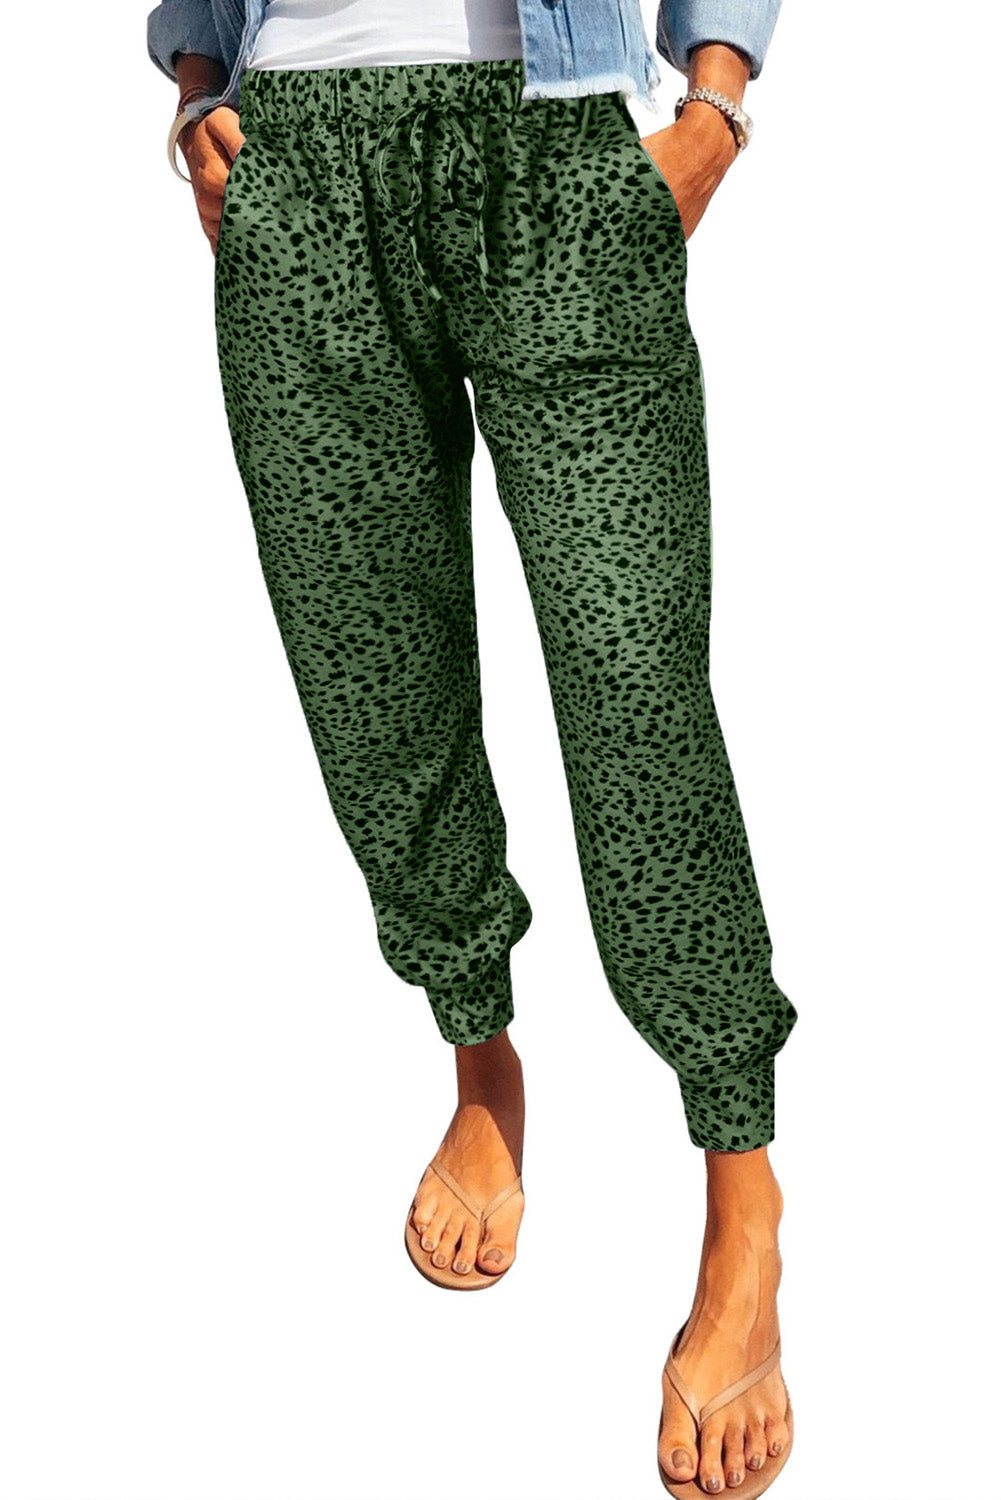 Leopard Print Joggers with Pockets - Bottoms - Pants - 20 - 2024